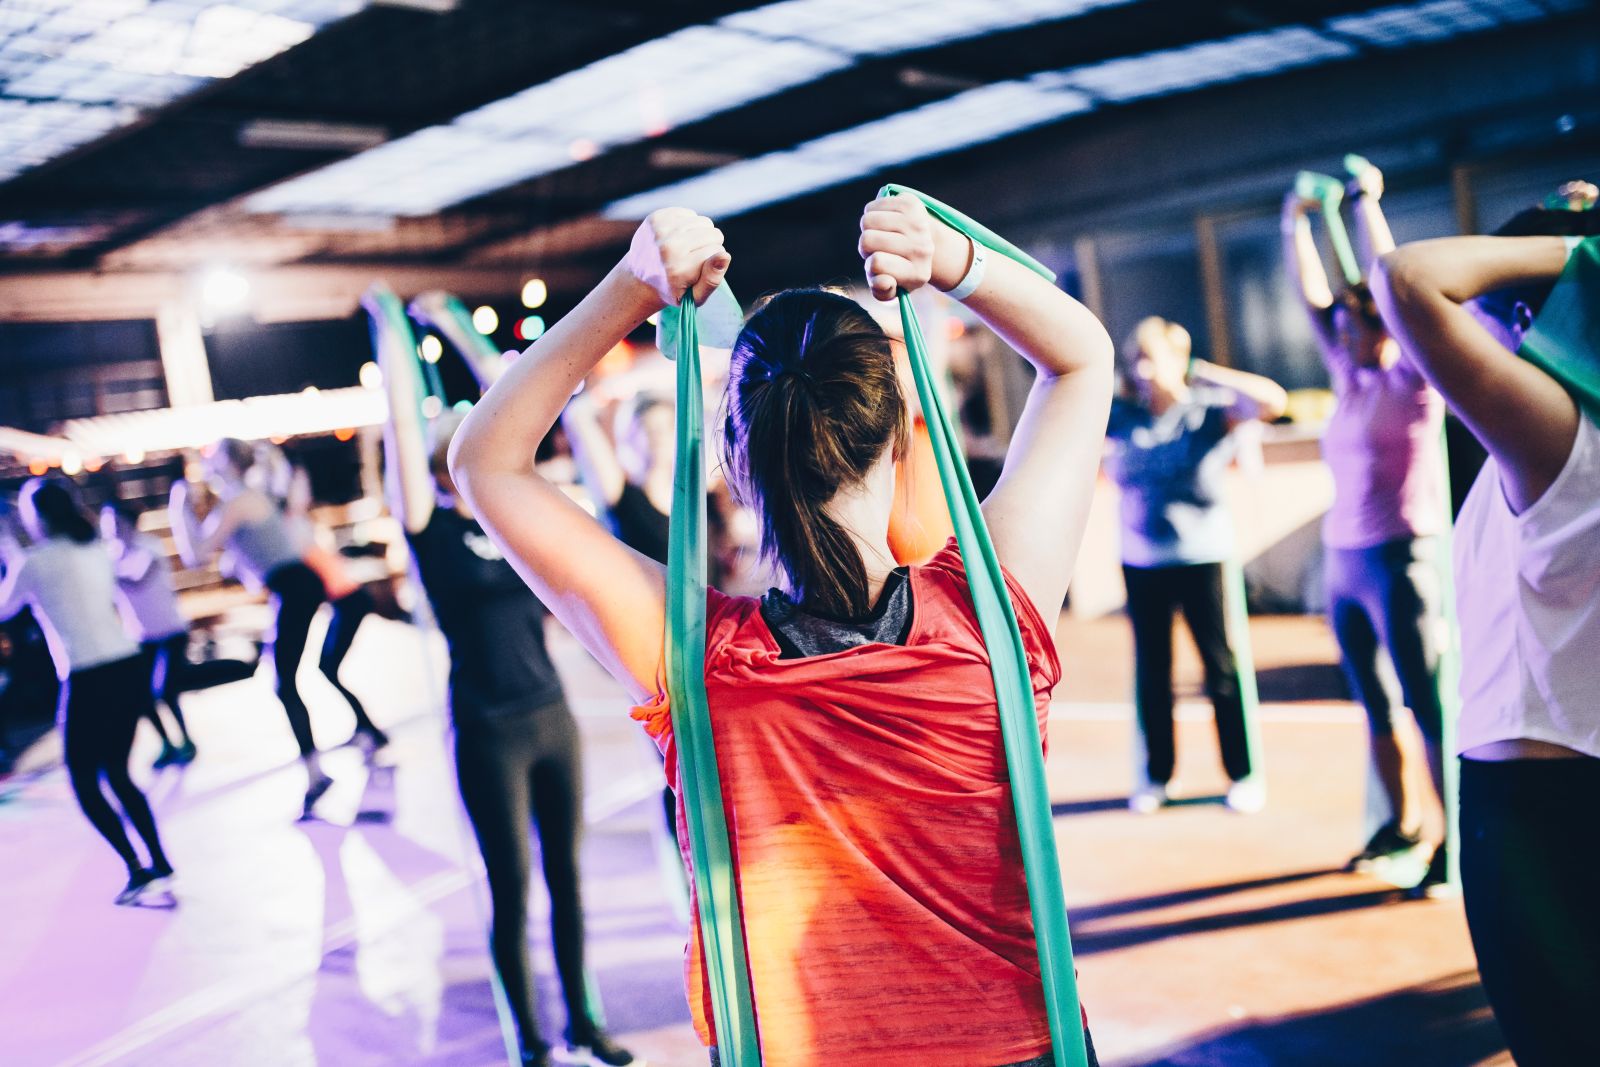 Consumer Products - Workout Class with Tension Bands